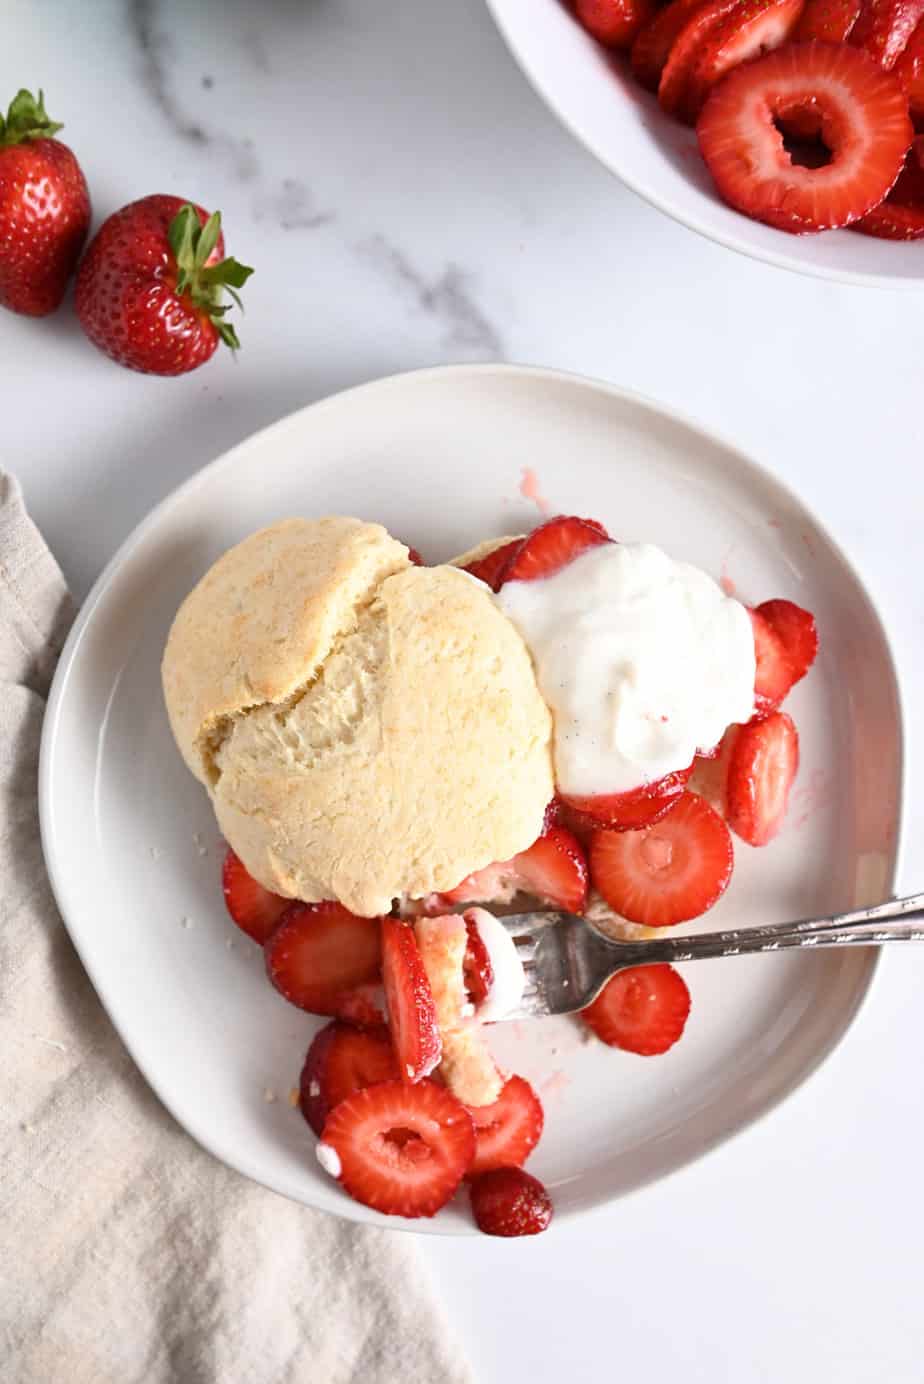 Overhead view of strawberry shortcake on a white plate, with a fork taking a bite of the cake, strawberries, and whipped cream.